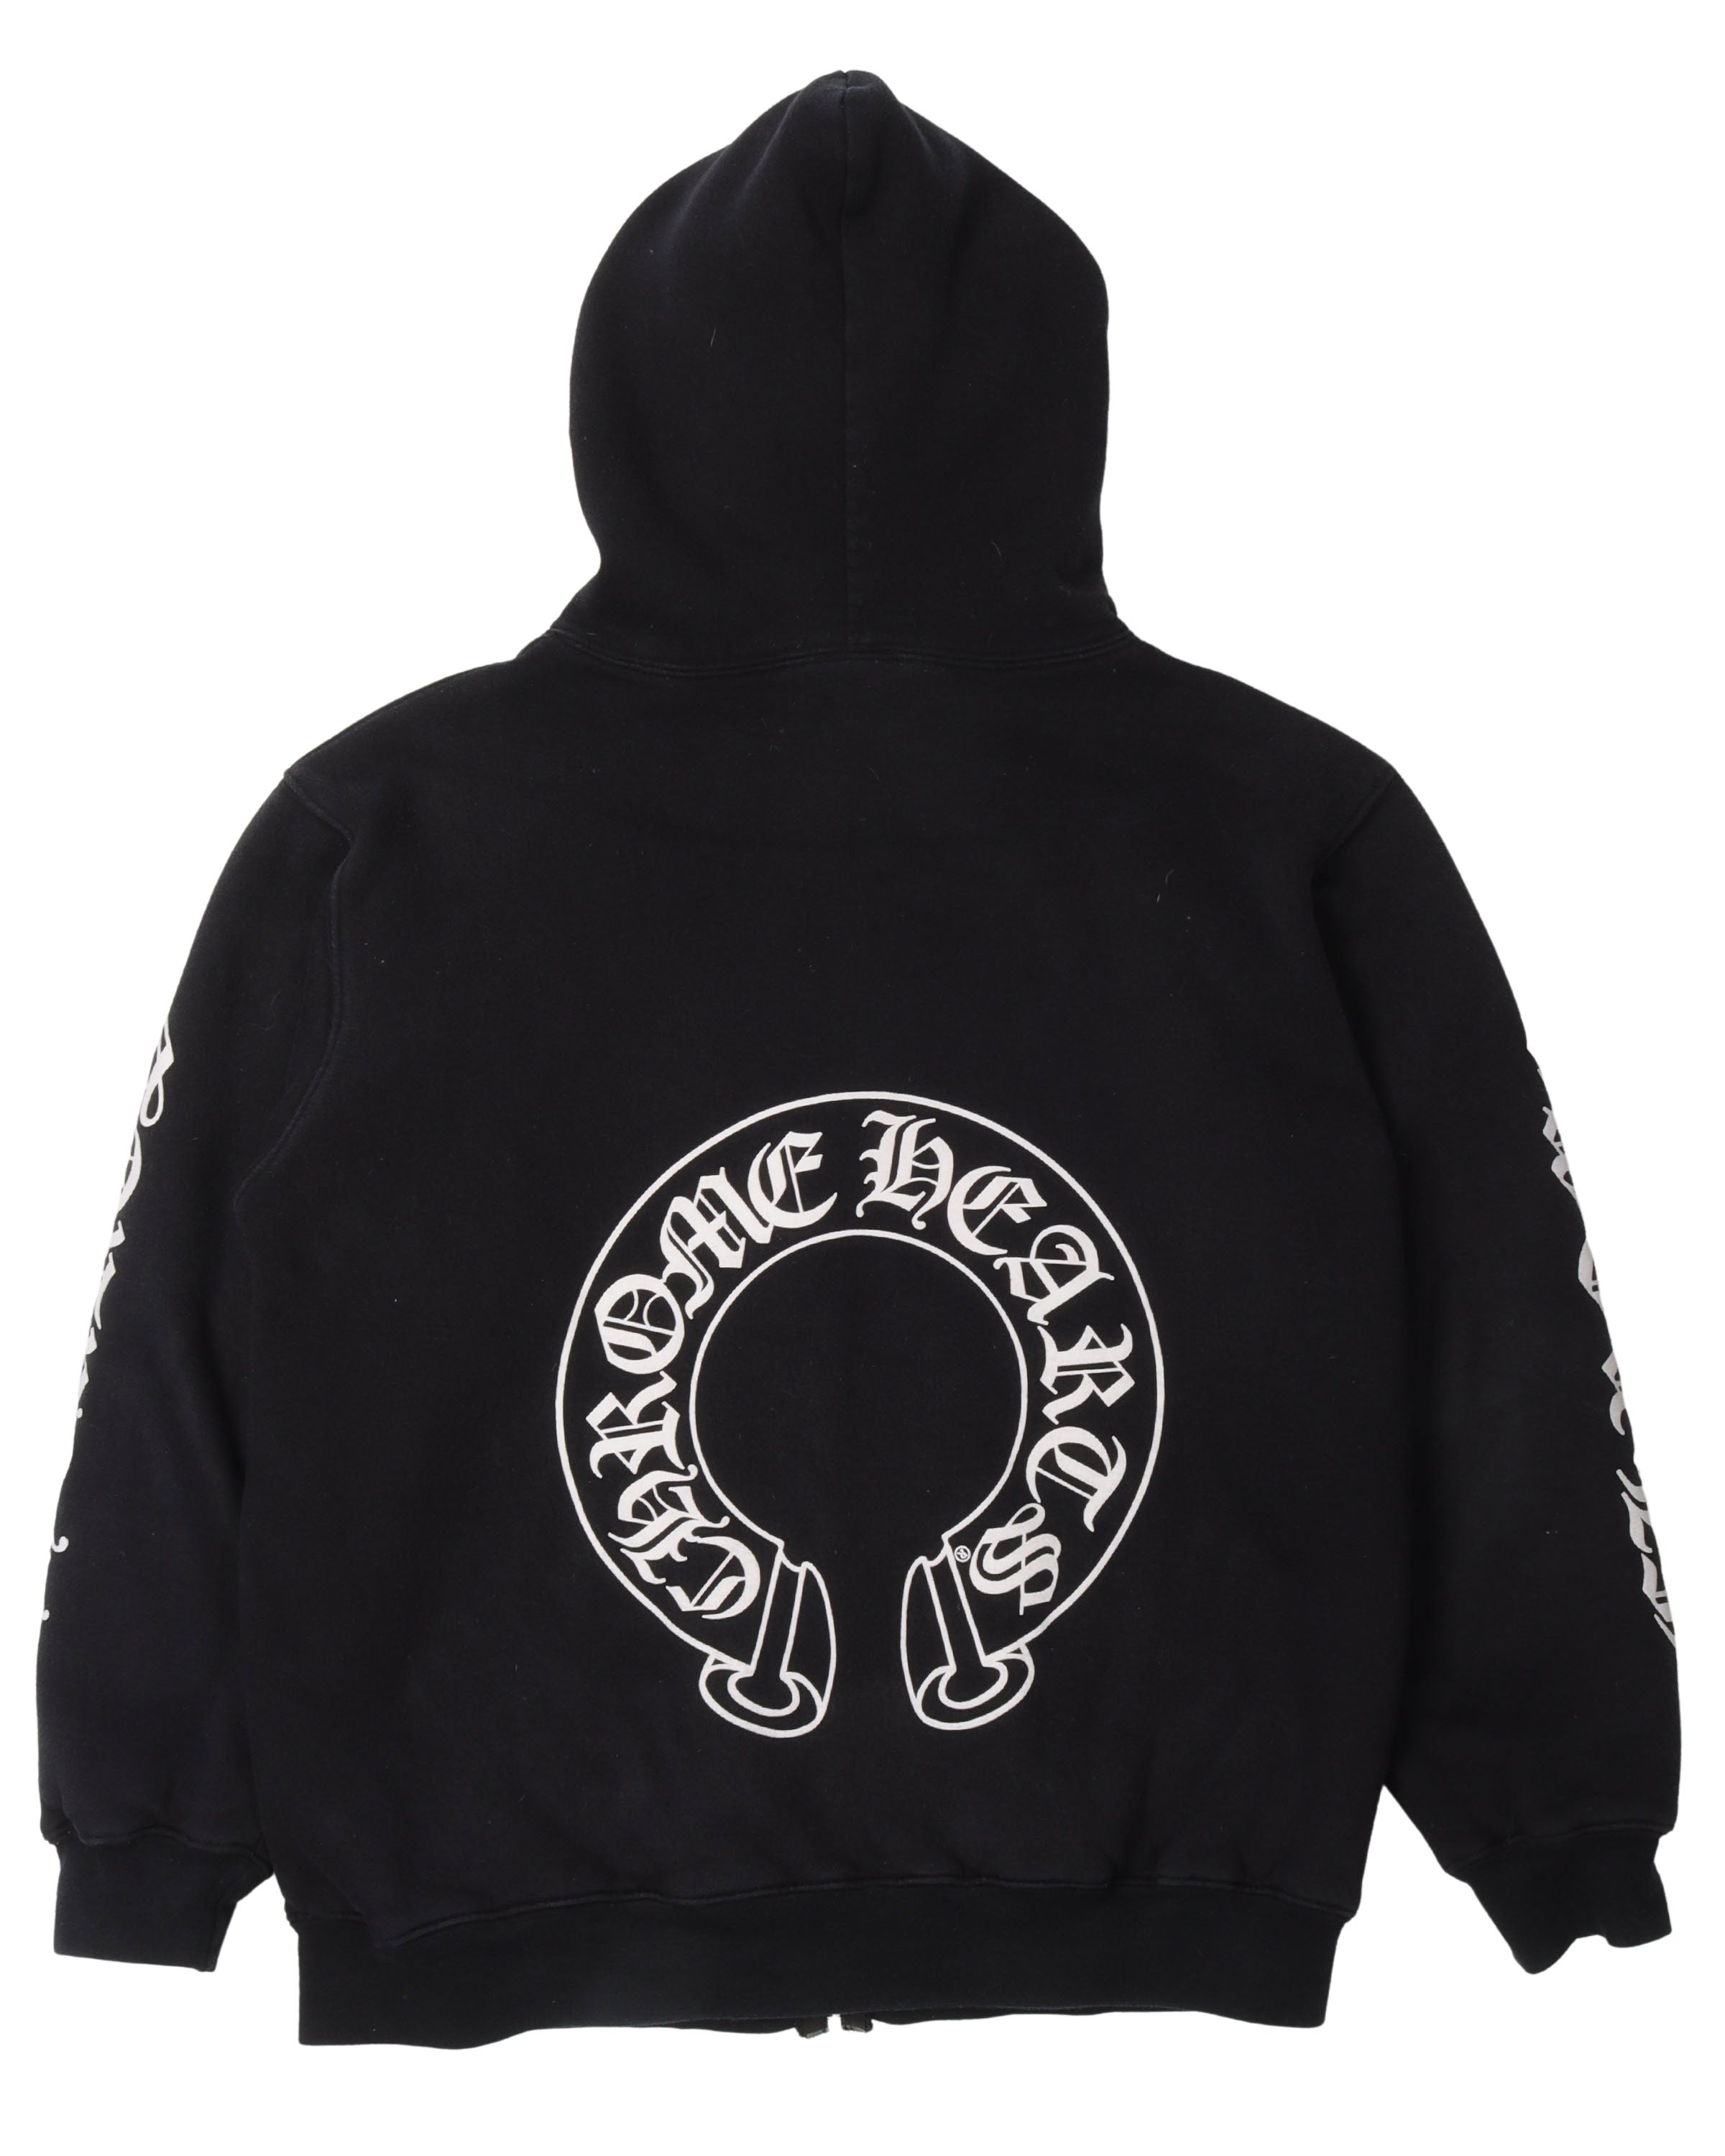 Chrome Hearts Fuck You Thermal Zip Up Hoodie